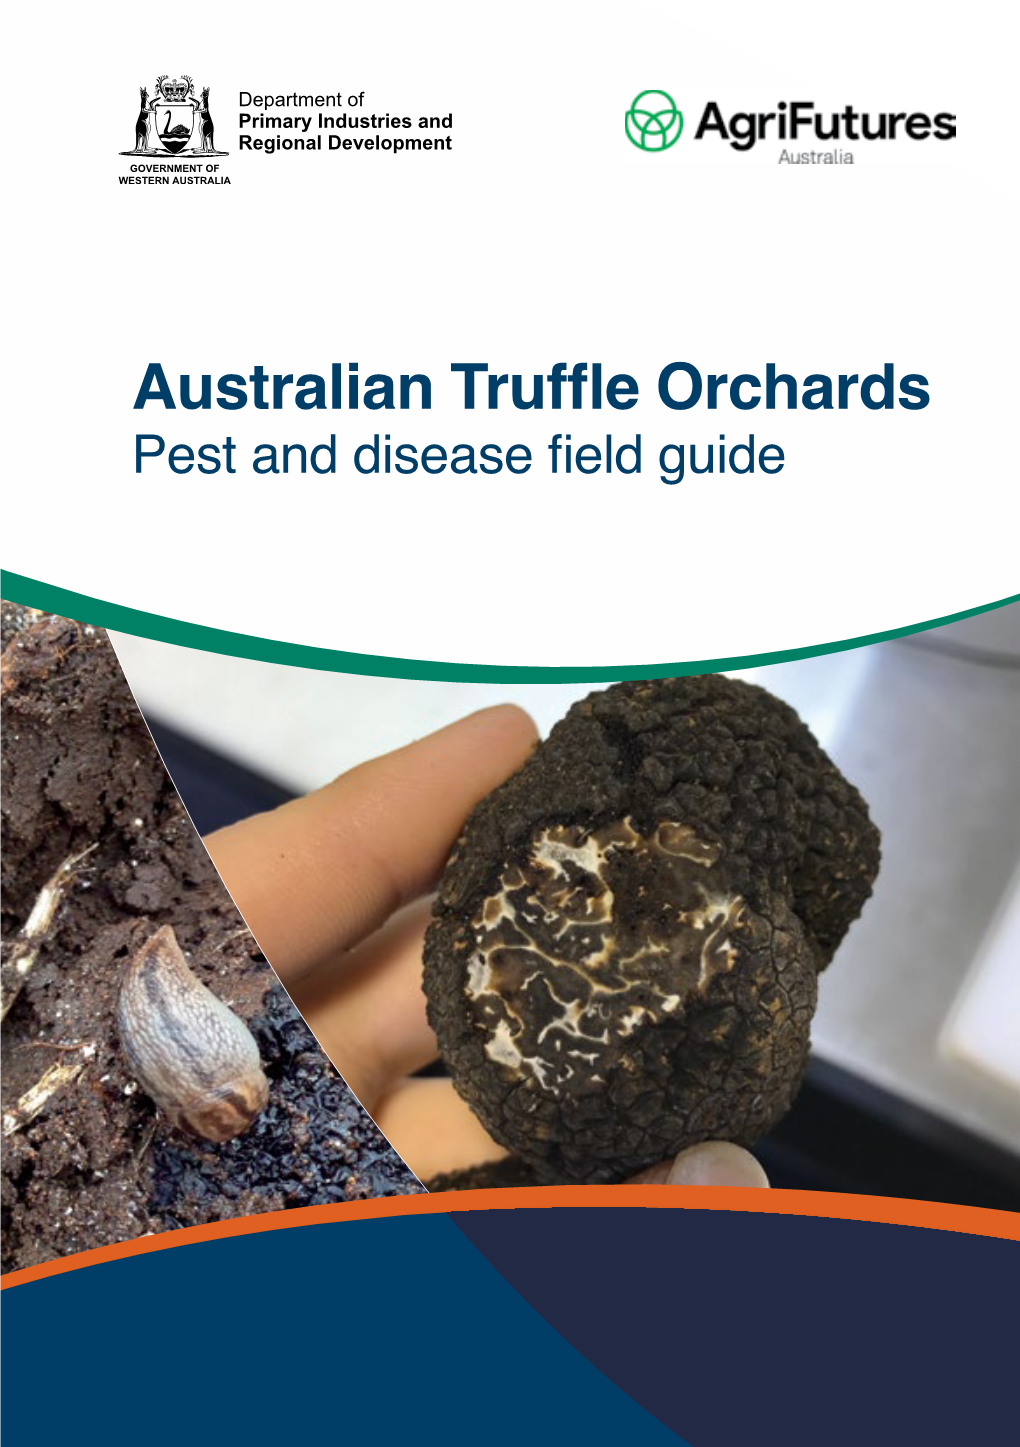 Australian Truffle Orchards – Pest and Disease Field Guide